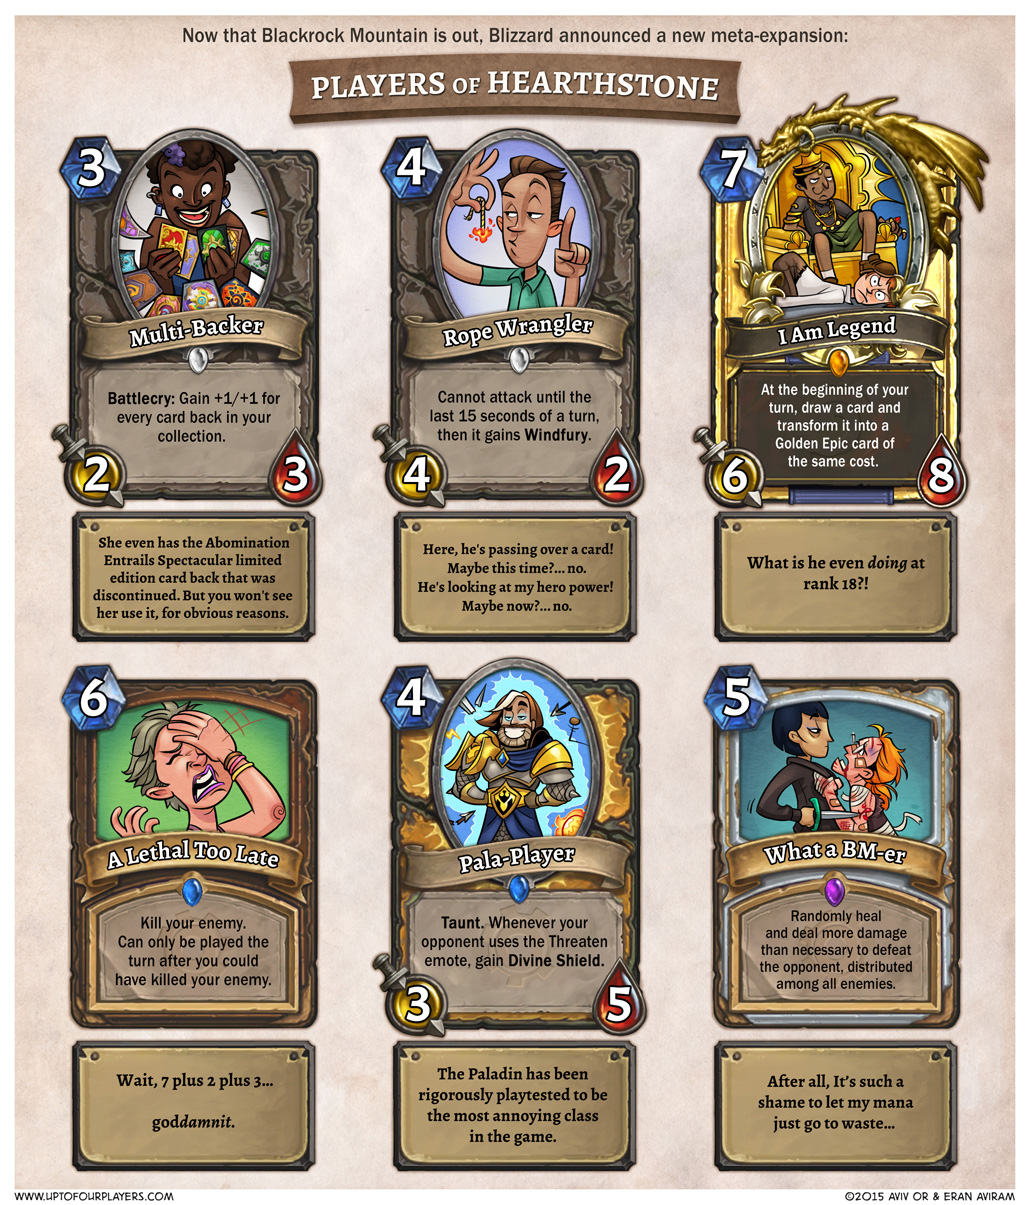 Players of Hearthstone: A Meta Expansion